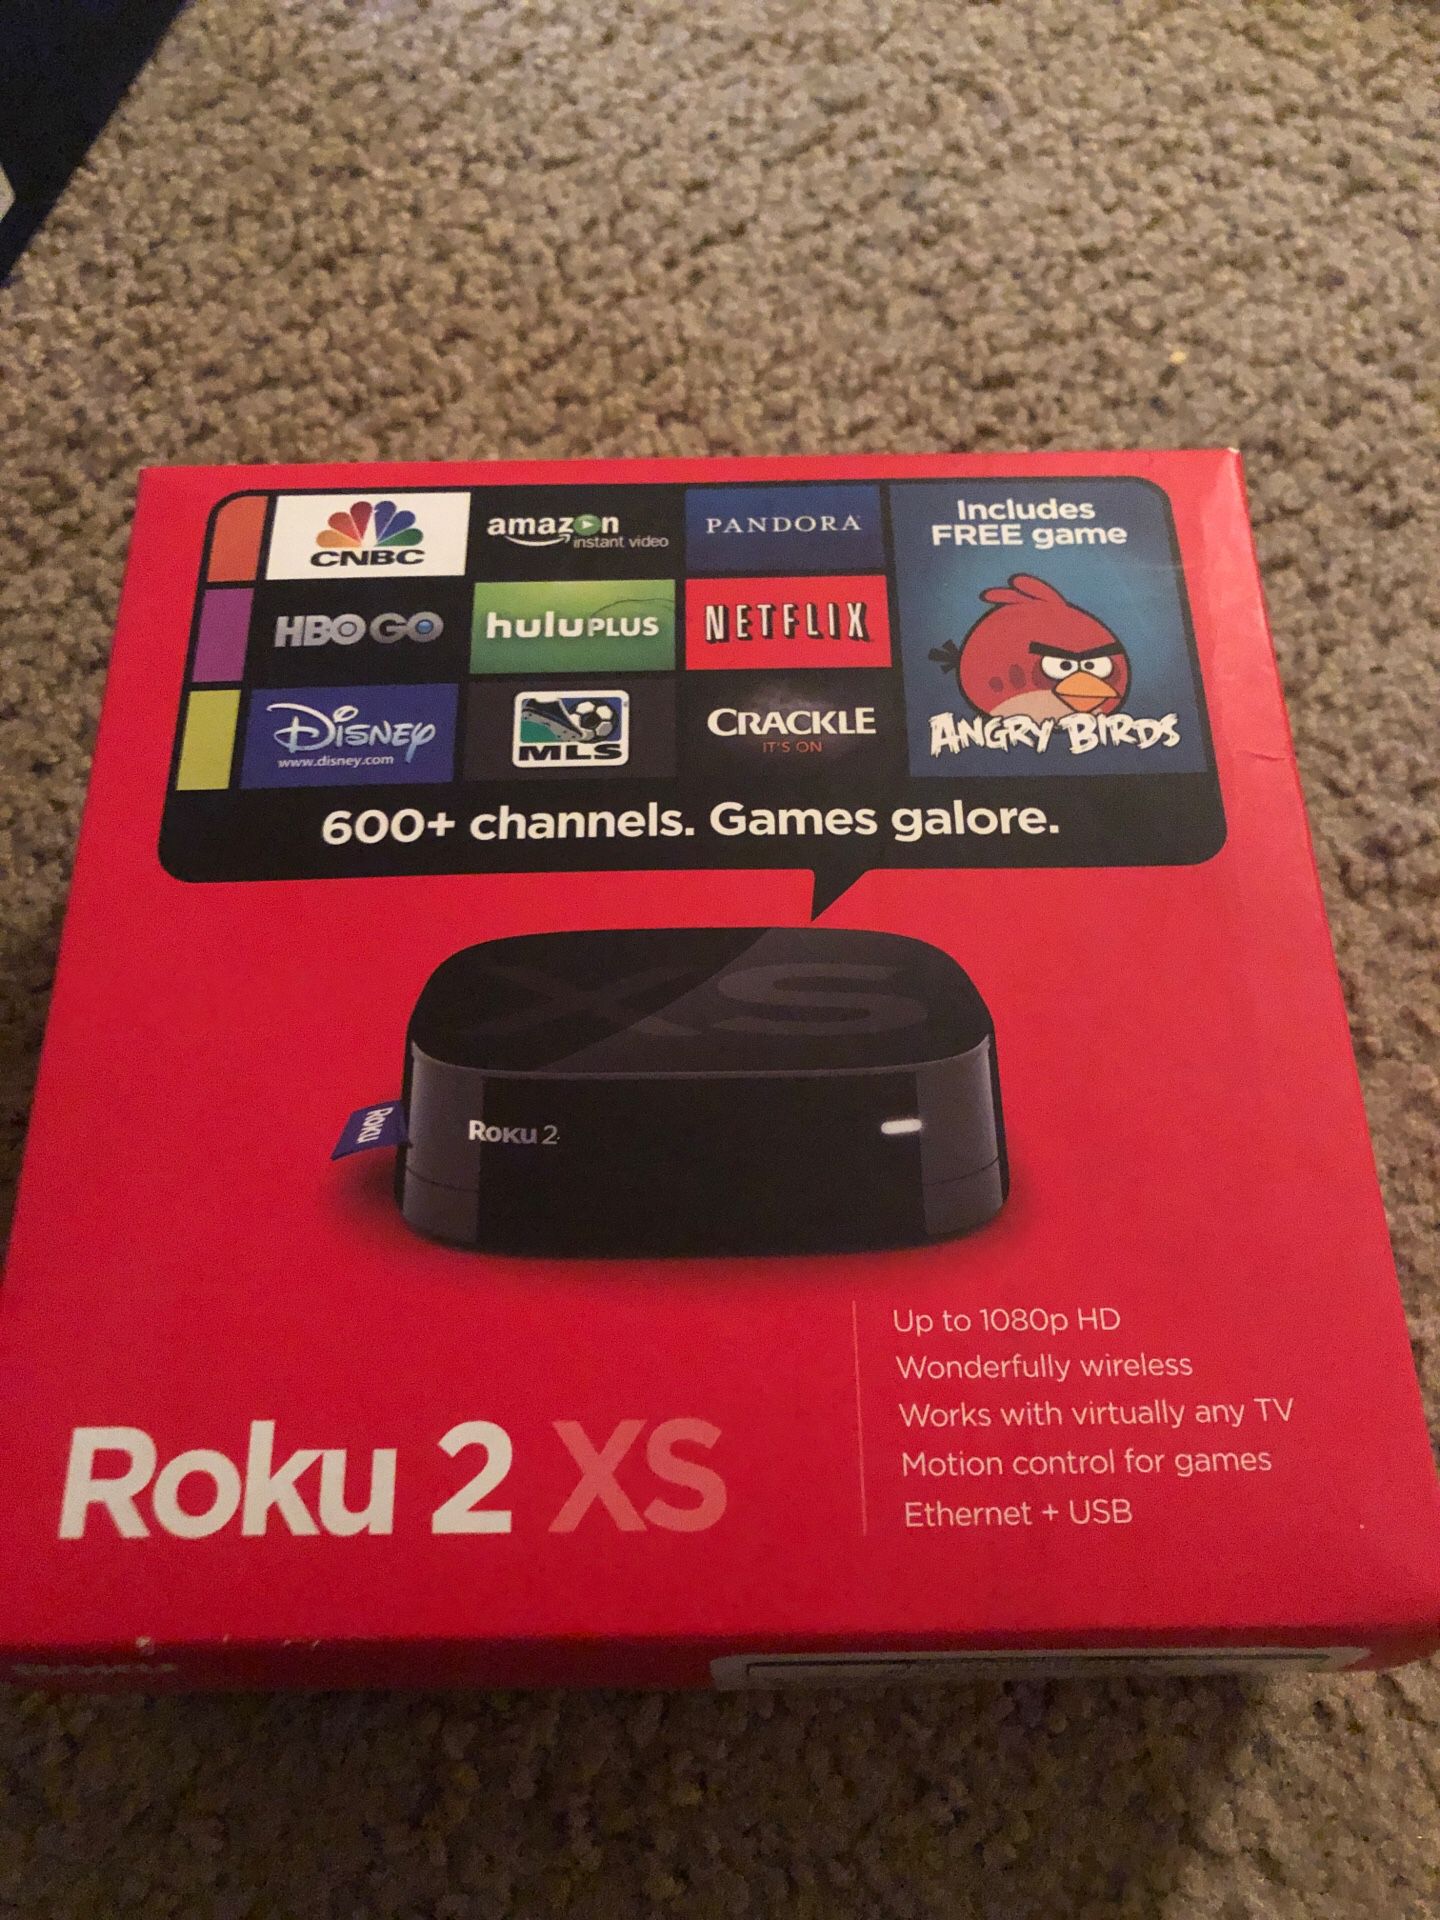 Roku 2 XS for streaming